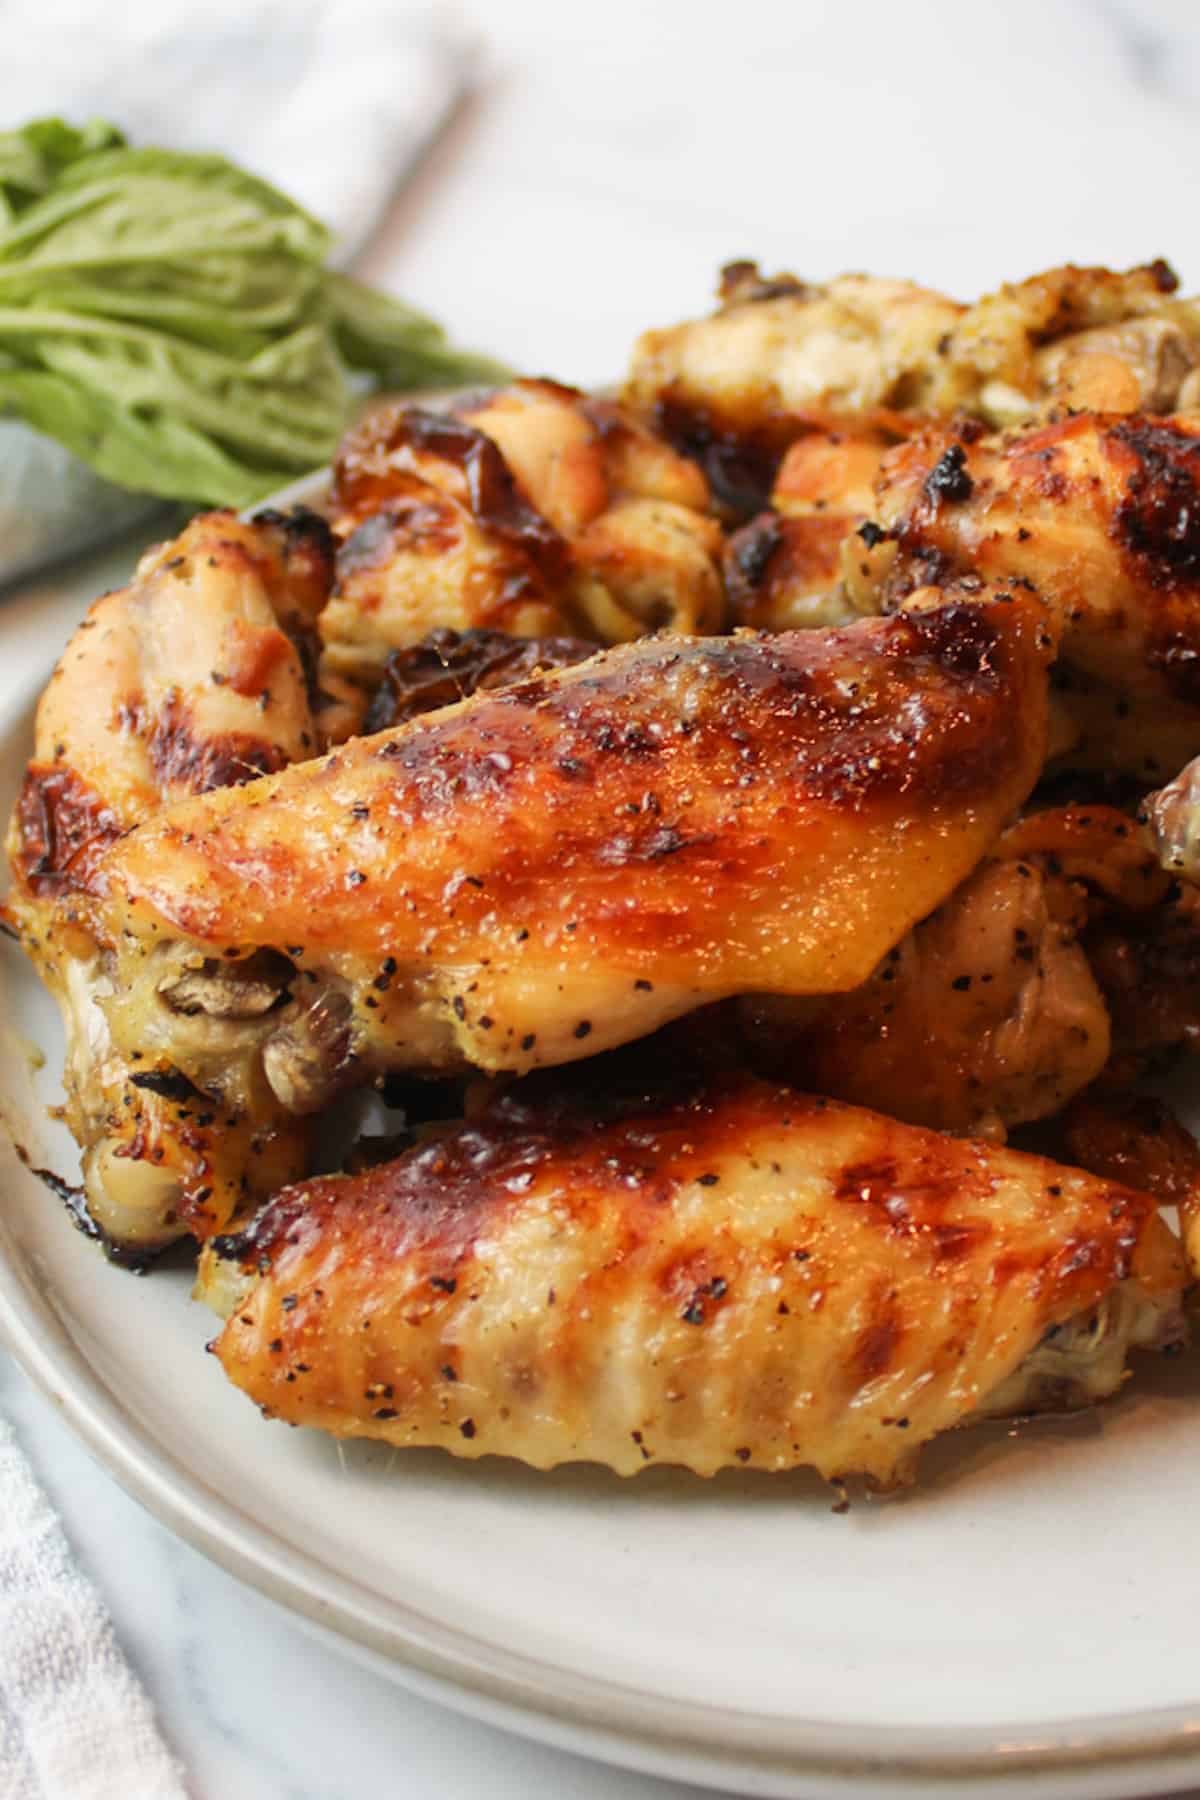 an upclose view of honey lemon pepper wings on a plate